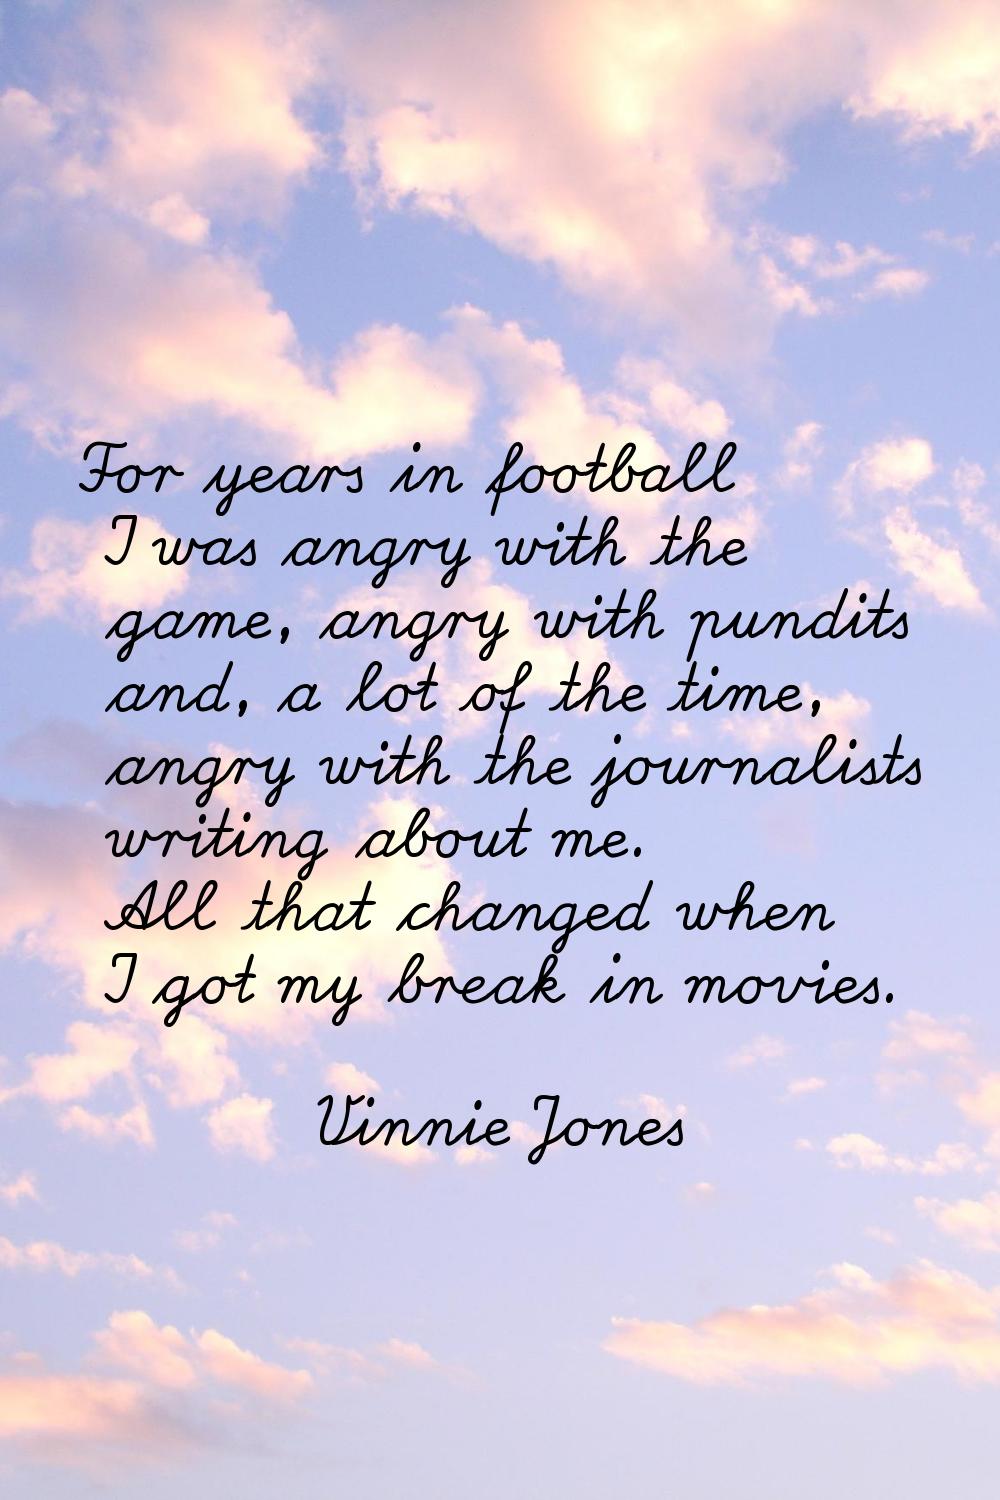 For years in football I was angry with the game, angry with pundits and, a lot of the time, angry w